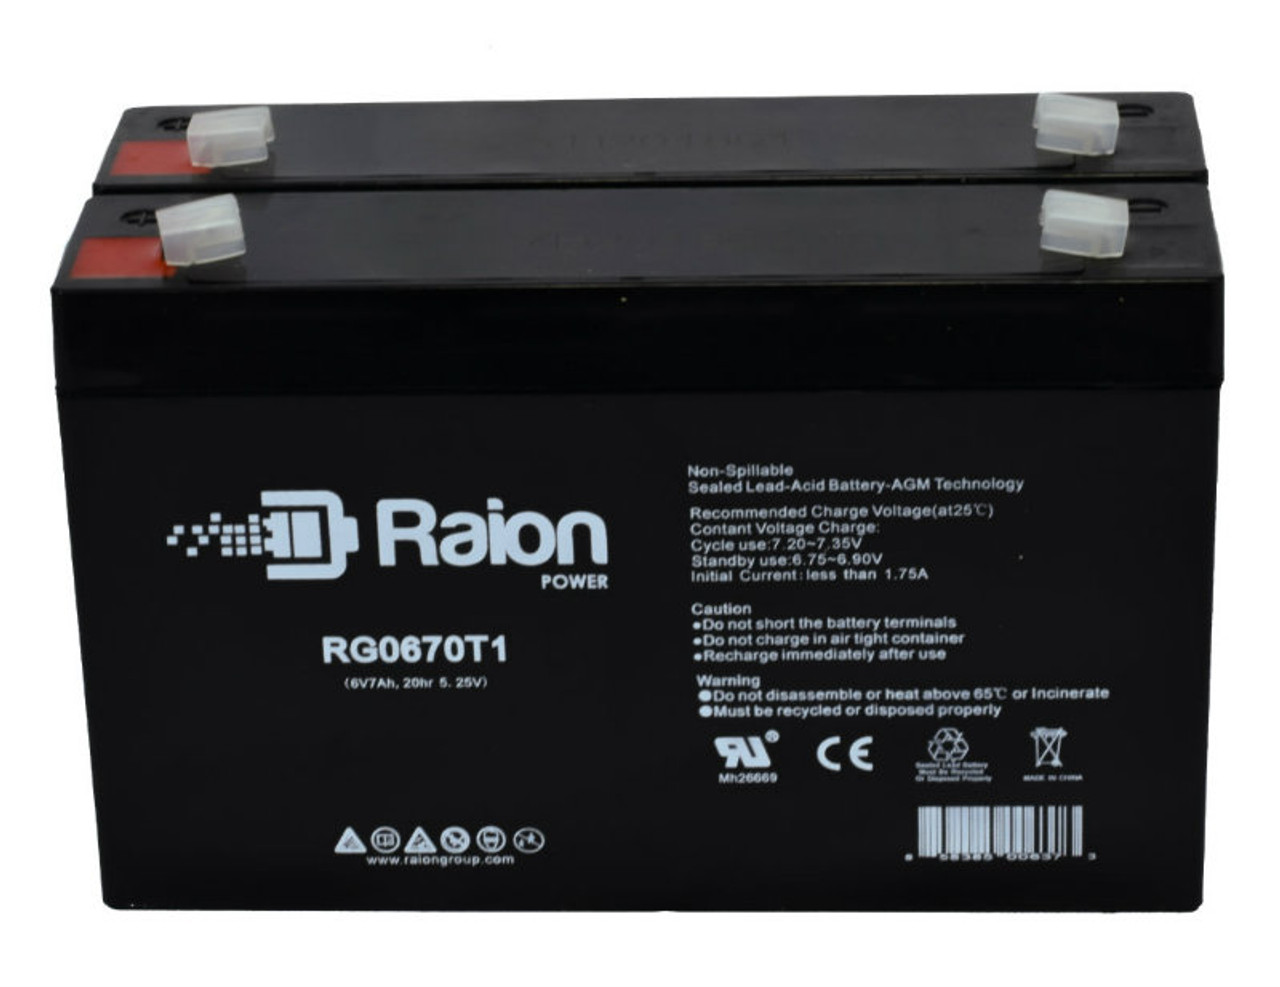 Raion Power RG0670T1 6V 7Ah Replacement Emergency Light Battery for Lithonia LLBE1 - 2 Pack